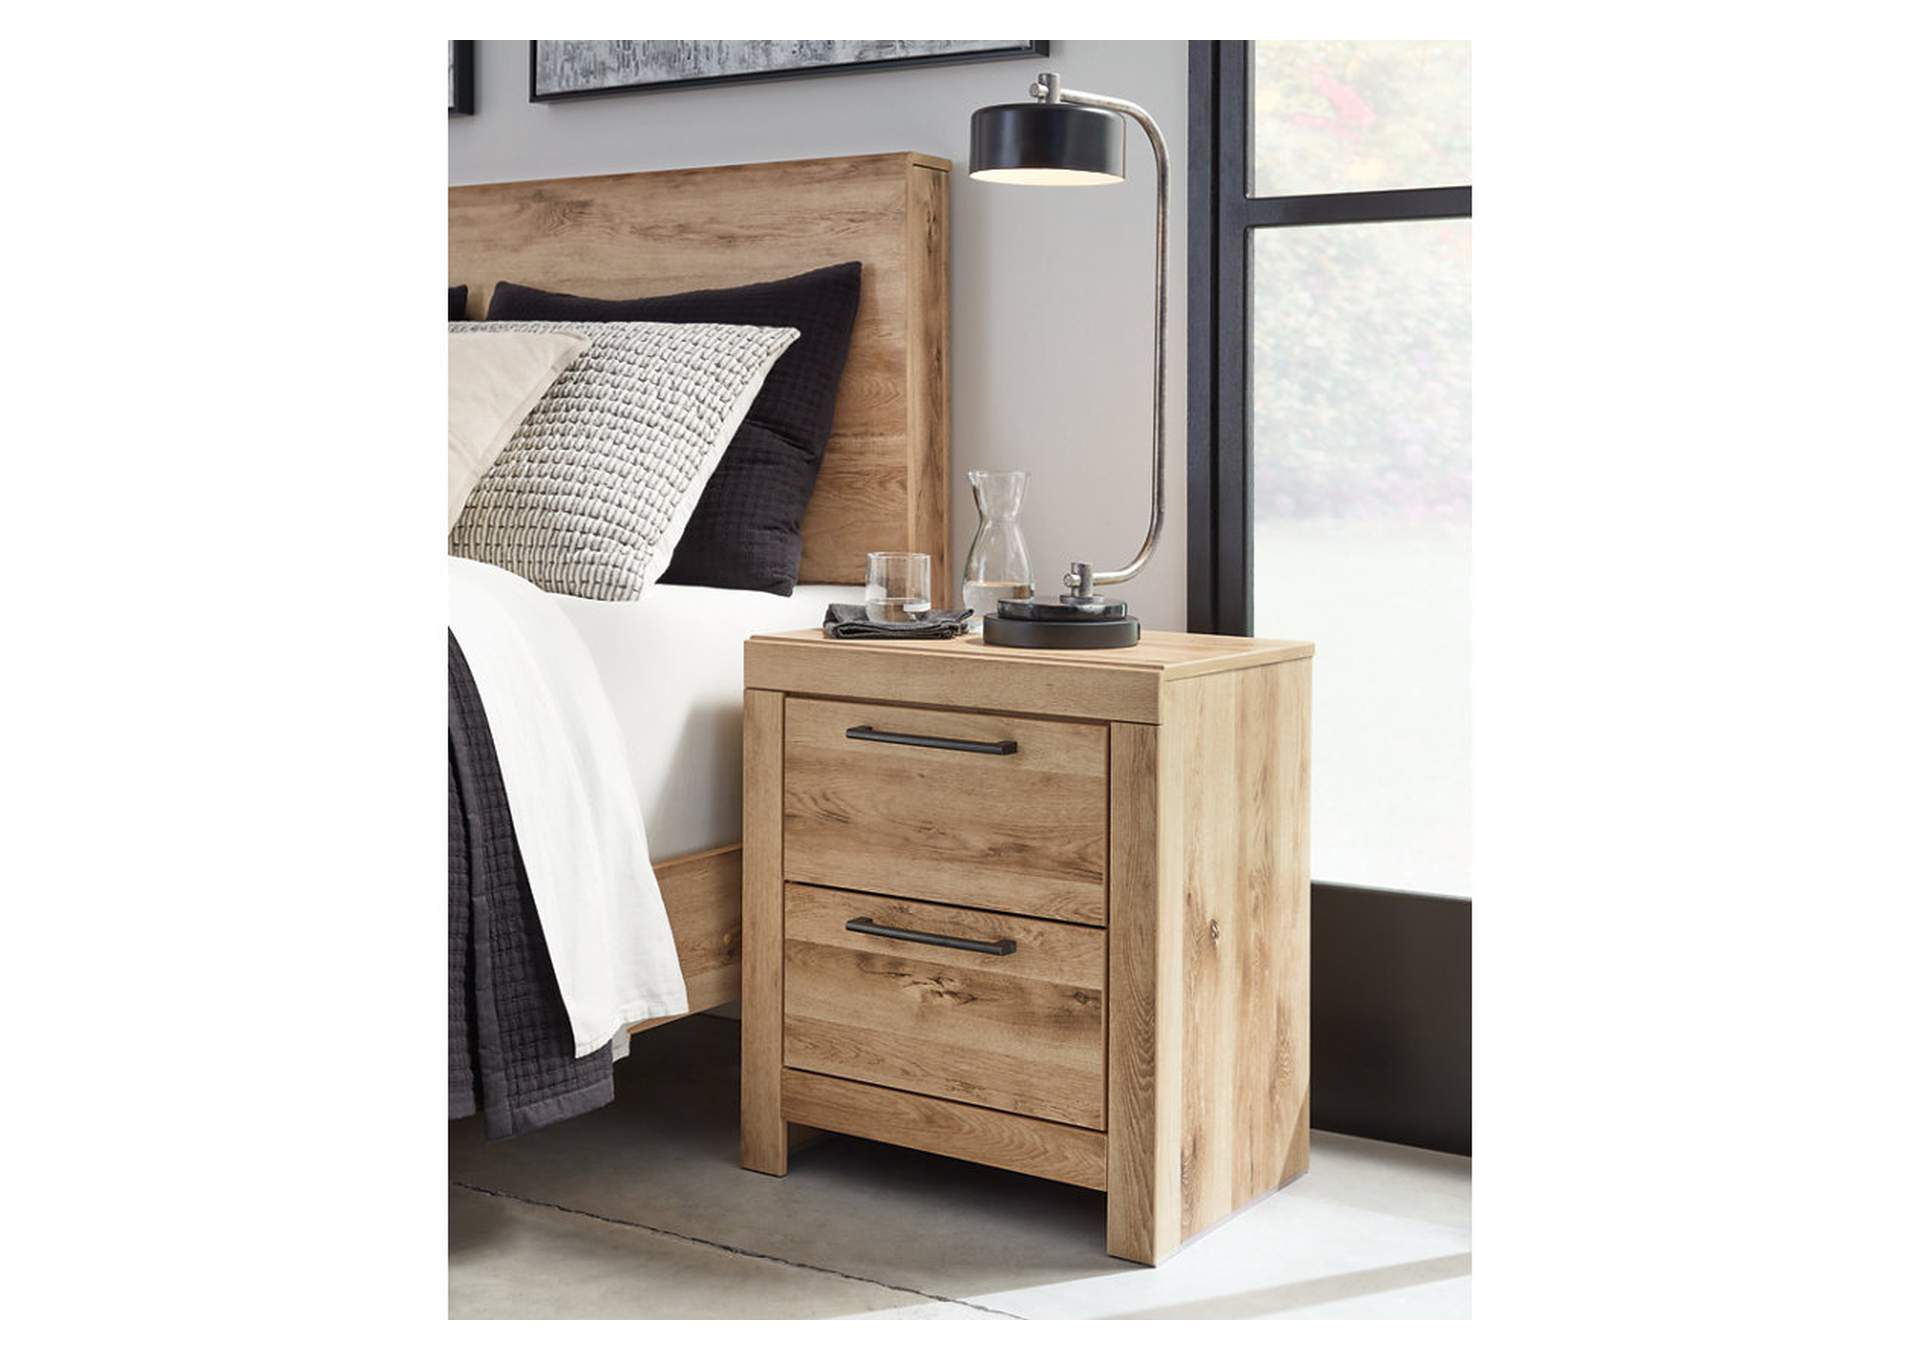 Hyanna Twin Panel Bed with Mirrored Dresser, Chest and 2 Nightstands,Signature Design By Ashley